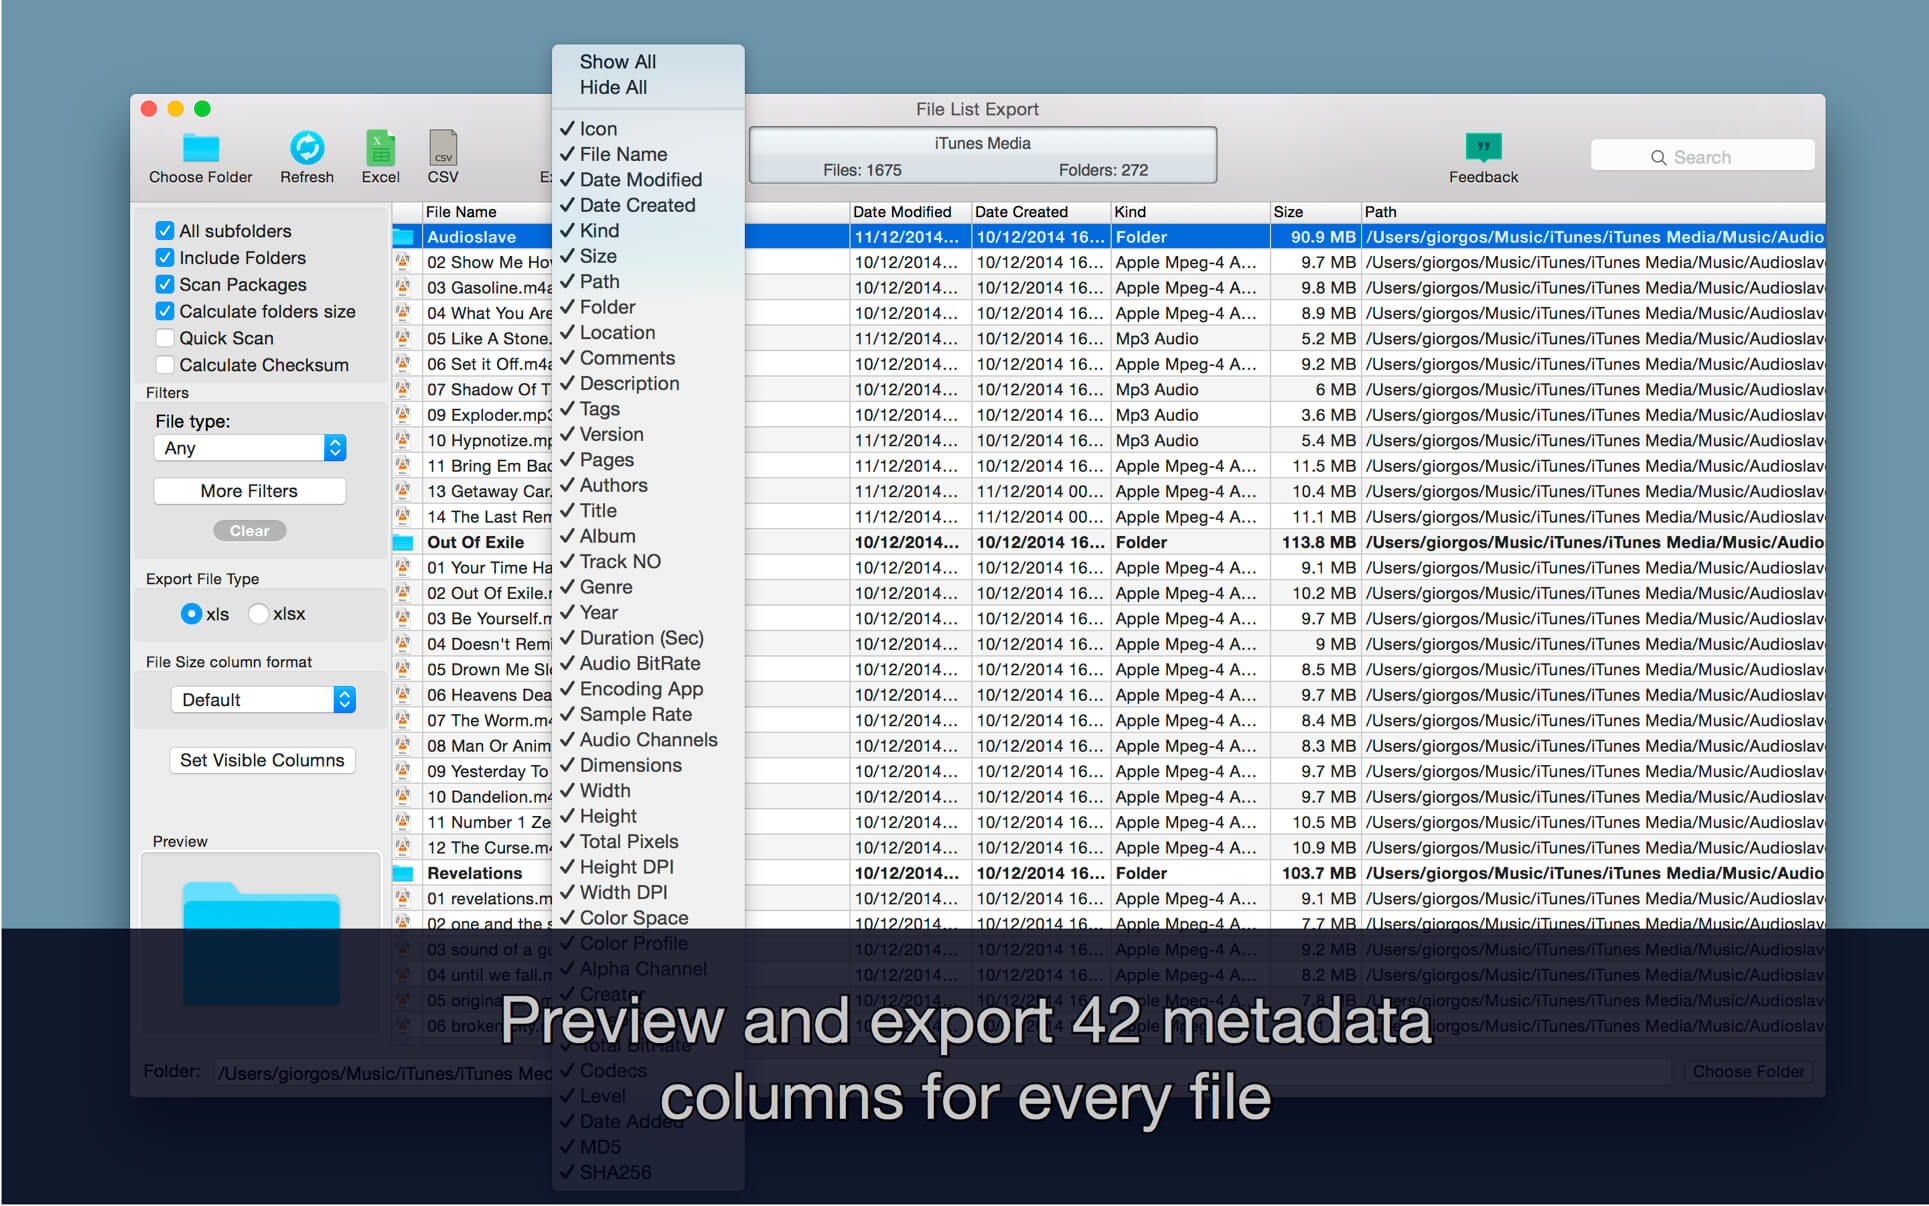 export list of files in folder and subfolders